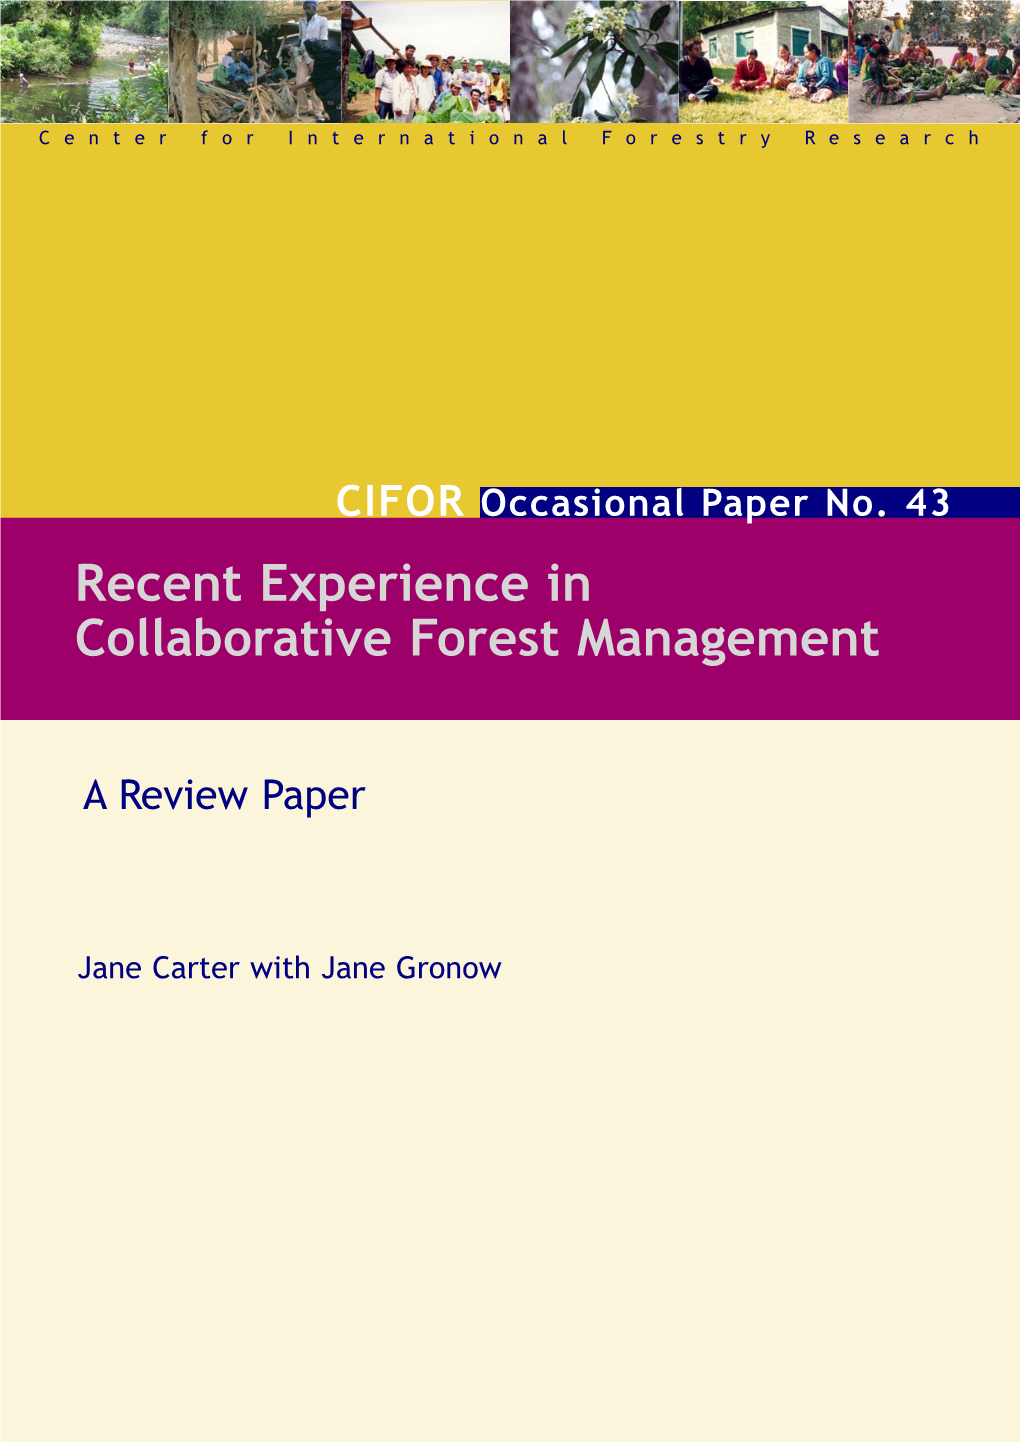 Recent Experience in Collaborative Forest Management